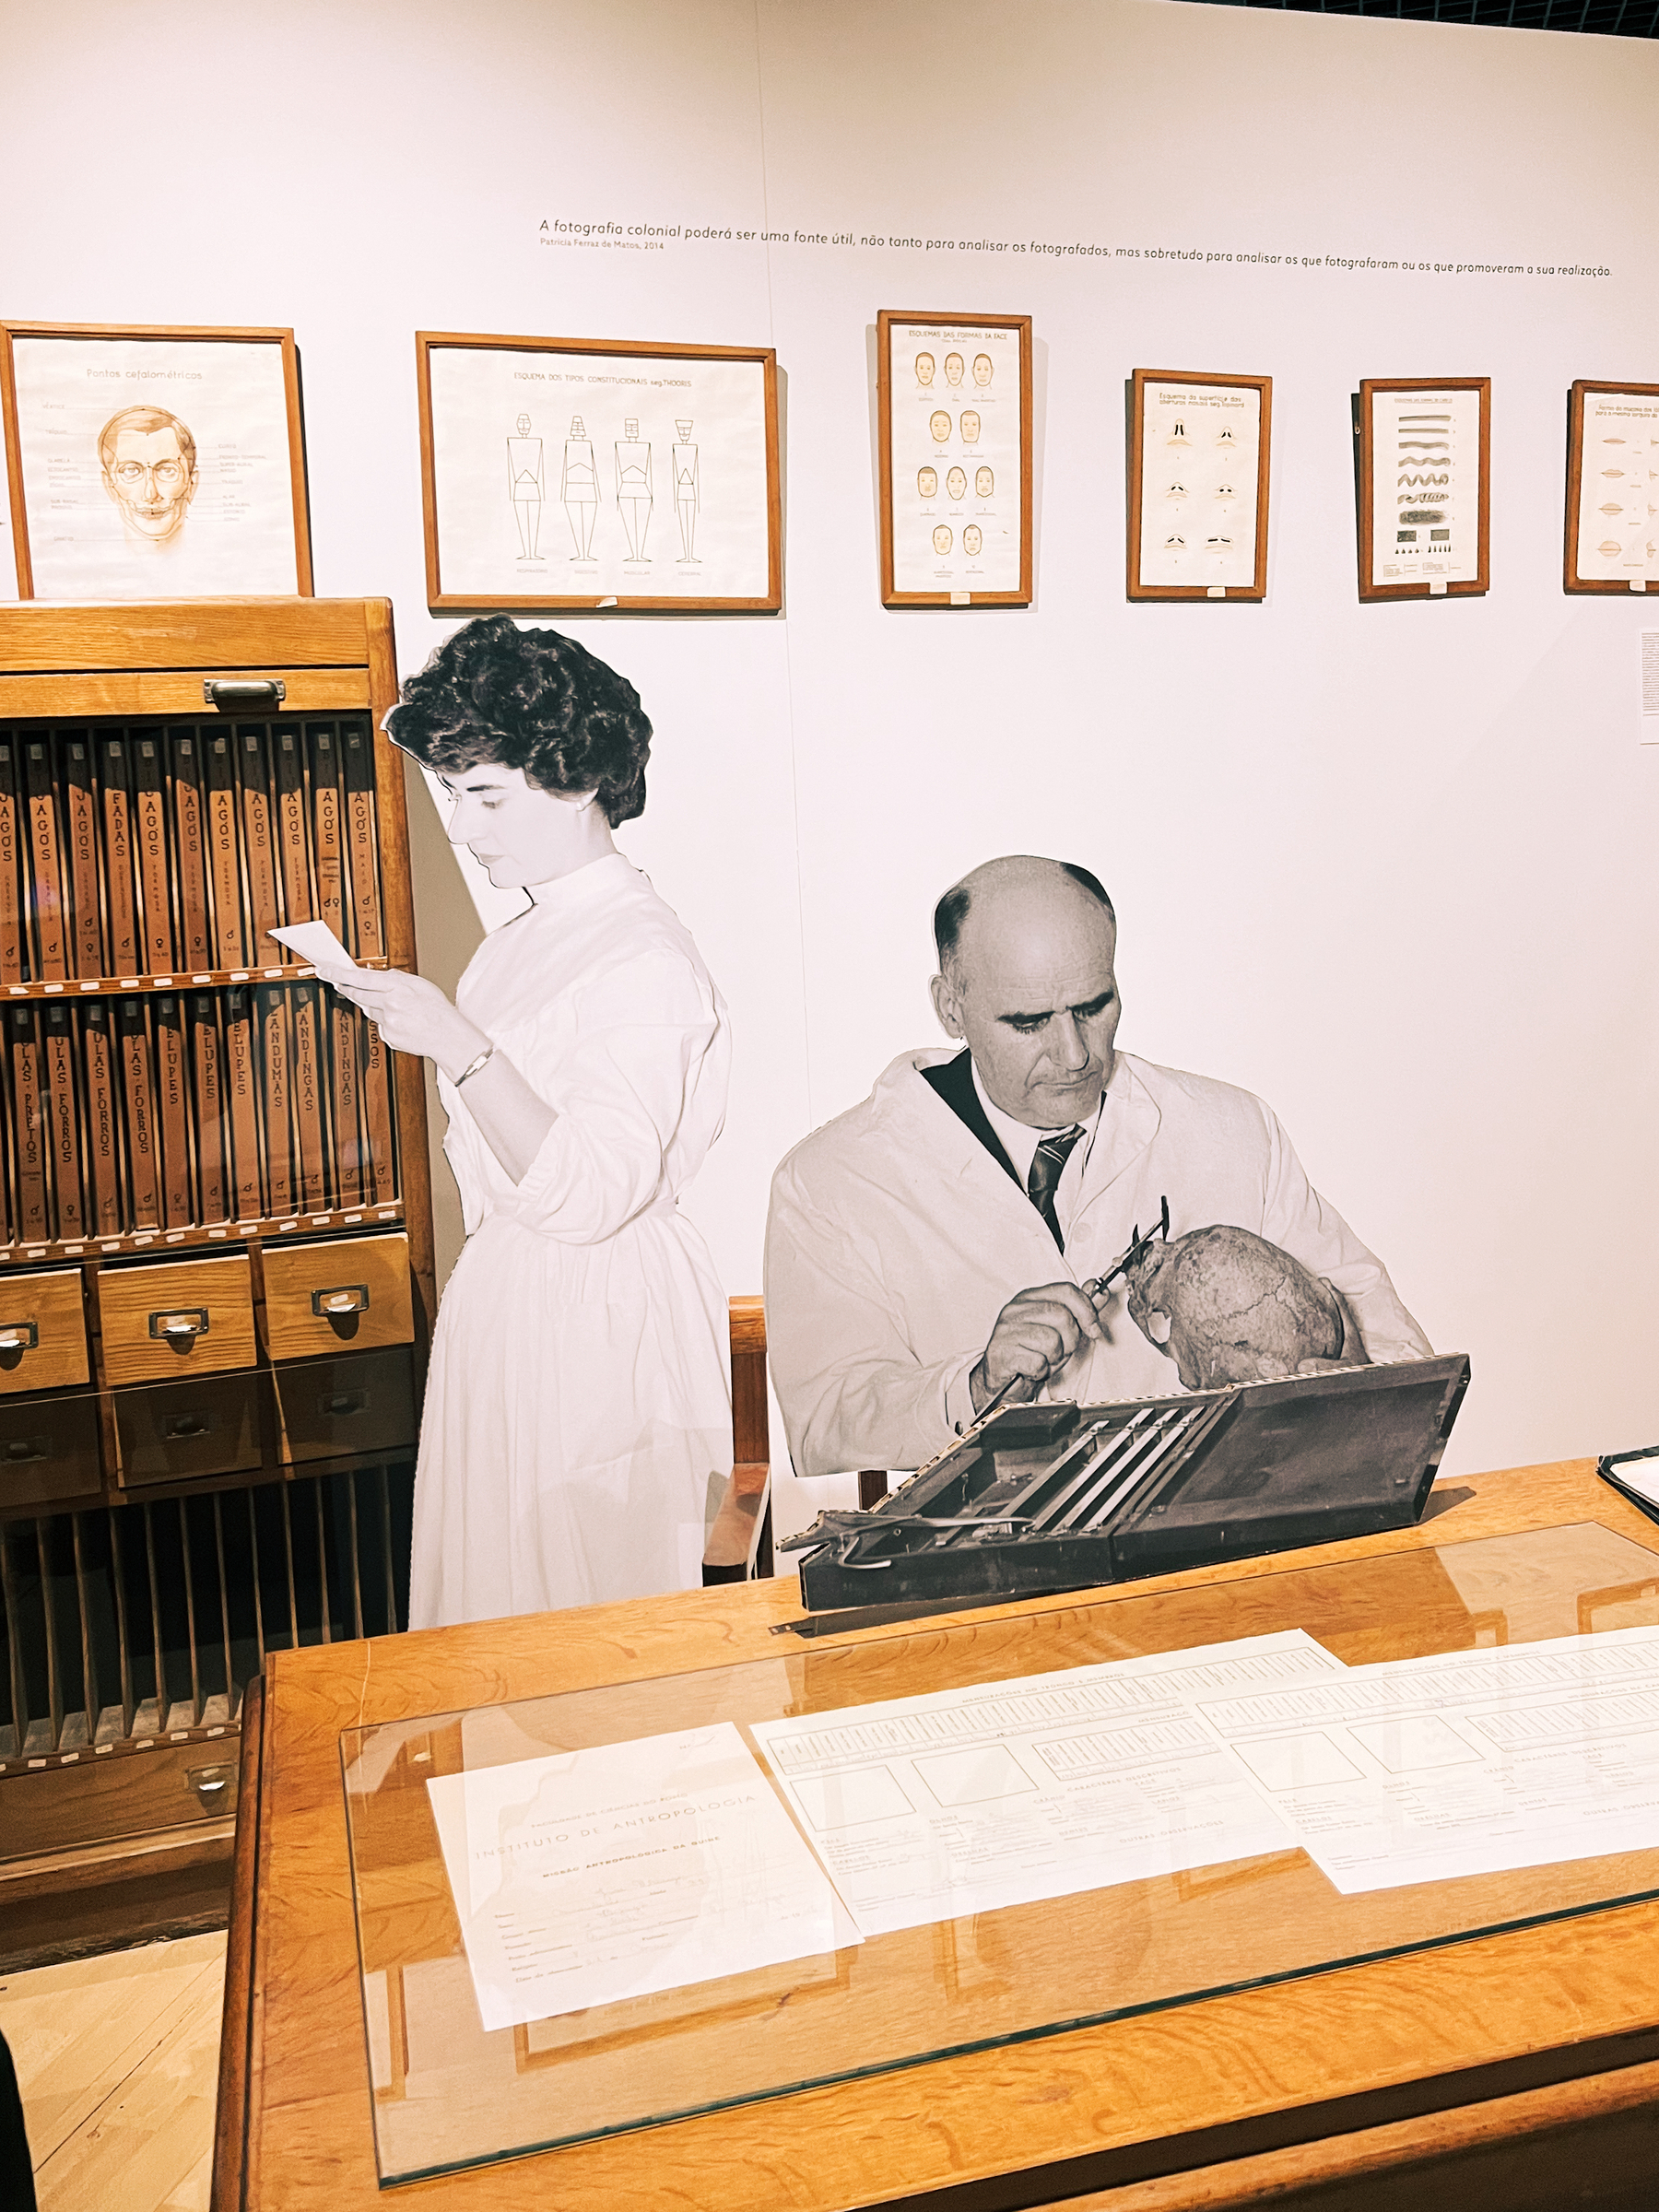 An exhibition with life sized black and white figures, a doctor and a nurse. 